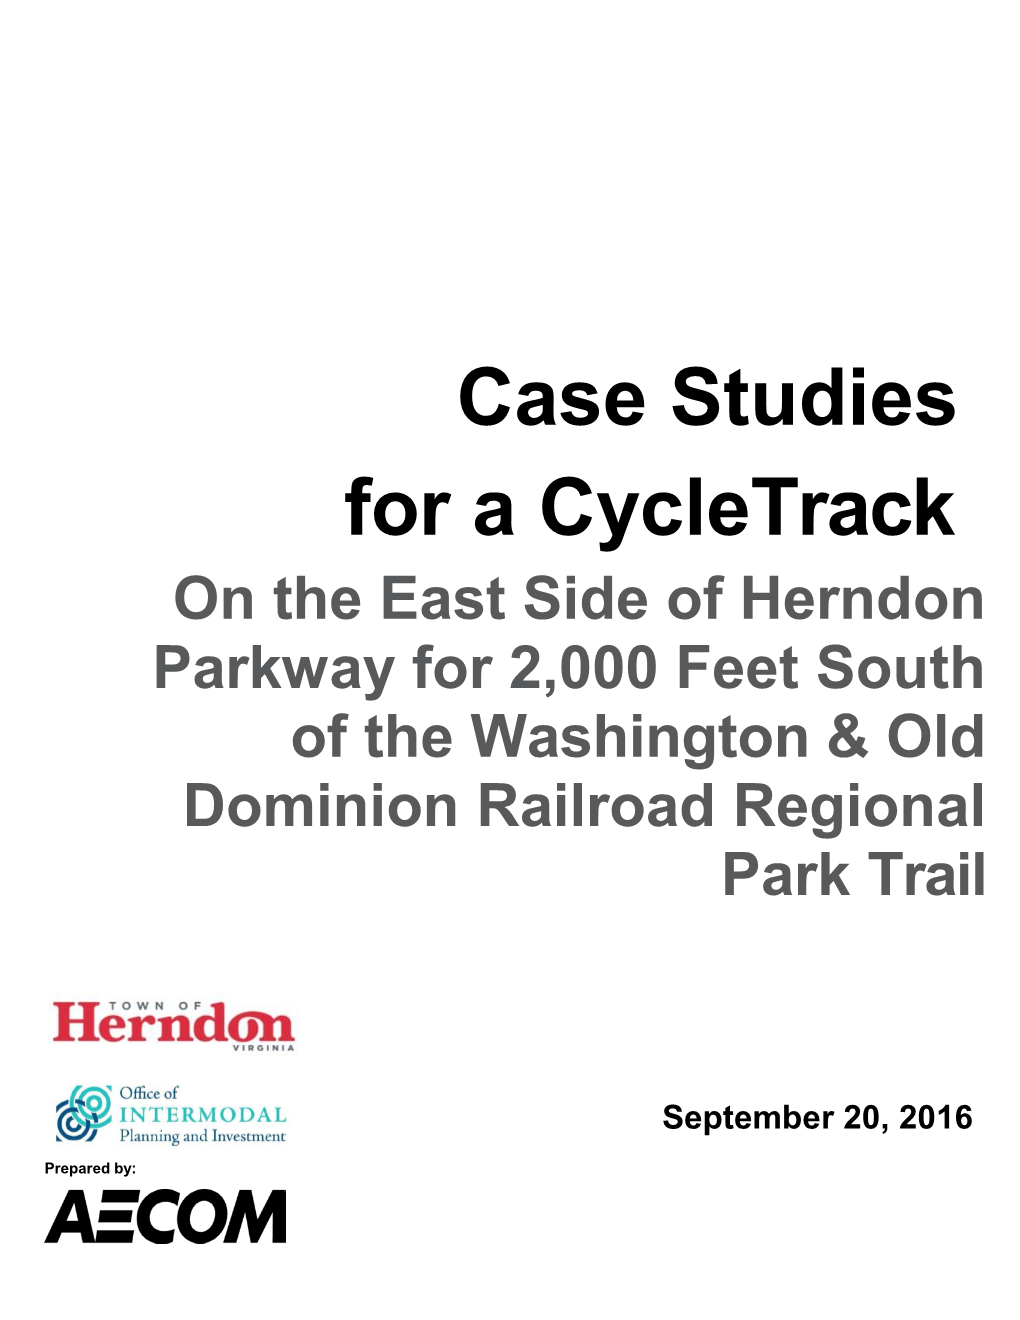 Case Studies for a Cycletrack on the East Side of Herndon Parkway for 2,000 Feet South of the Washington & Old Dominion Railroad Regional Park Trail